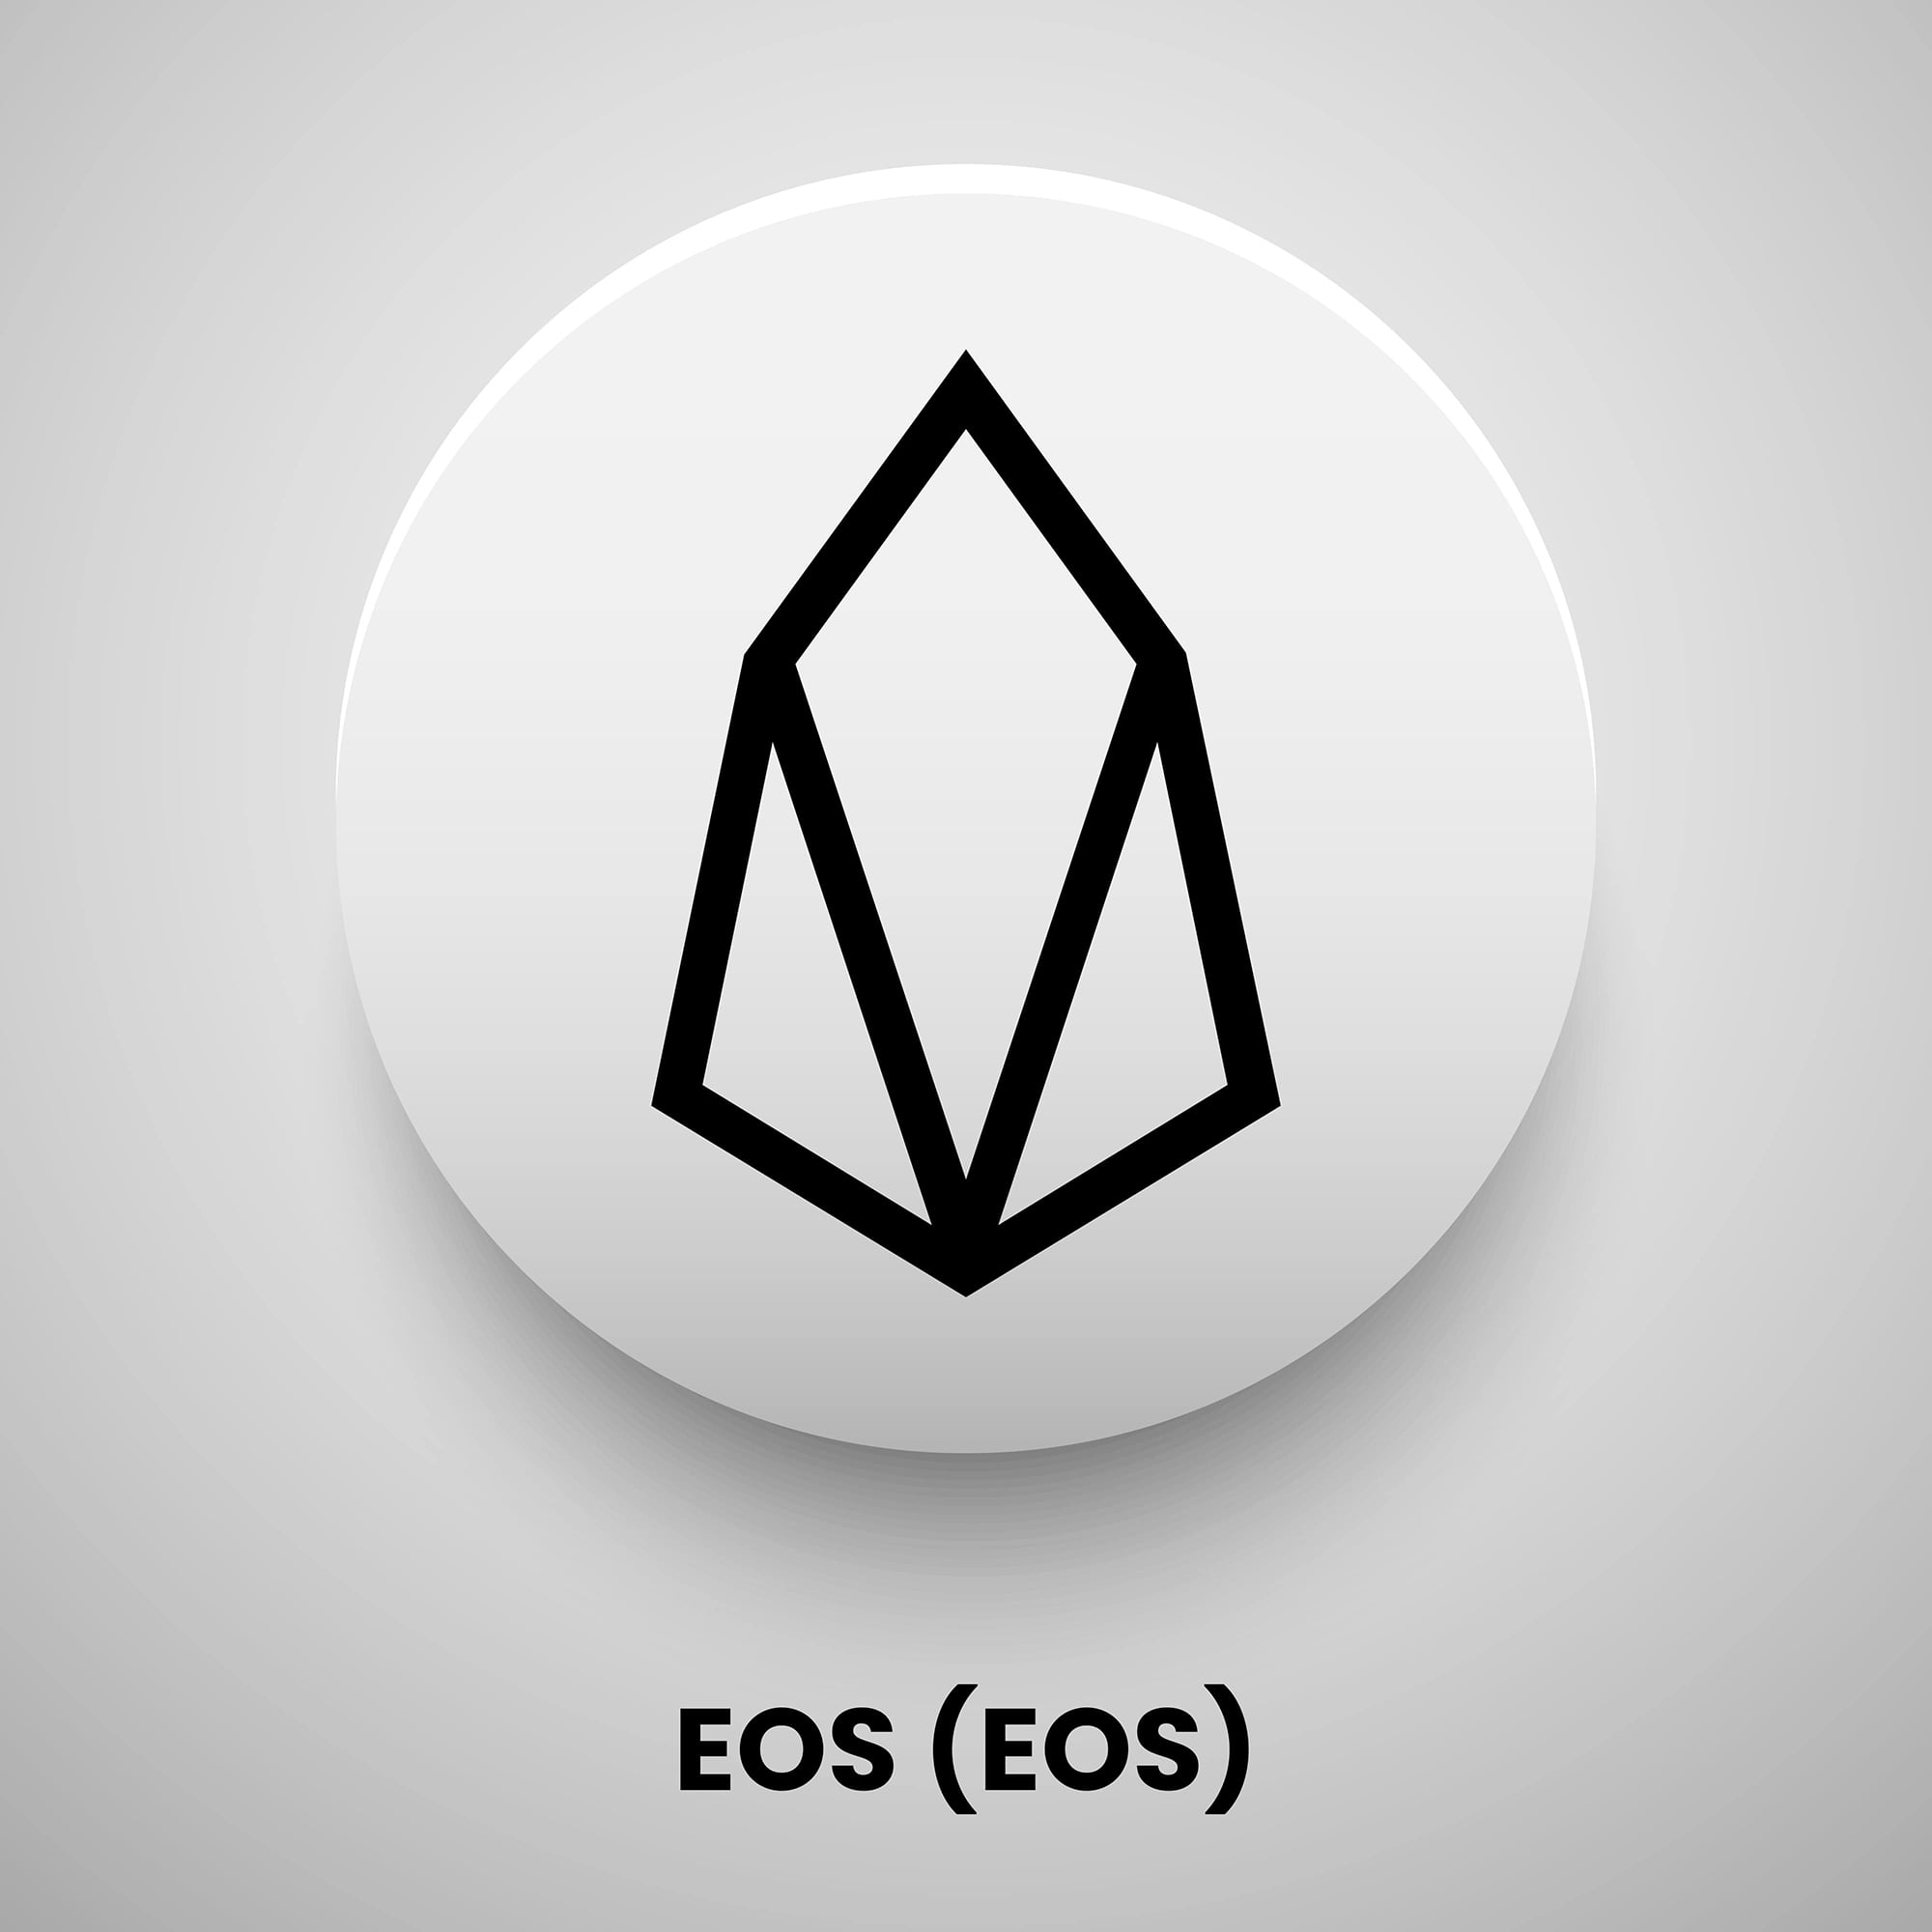 EOS crypto currency logo free vector download